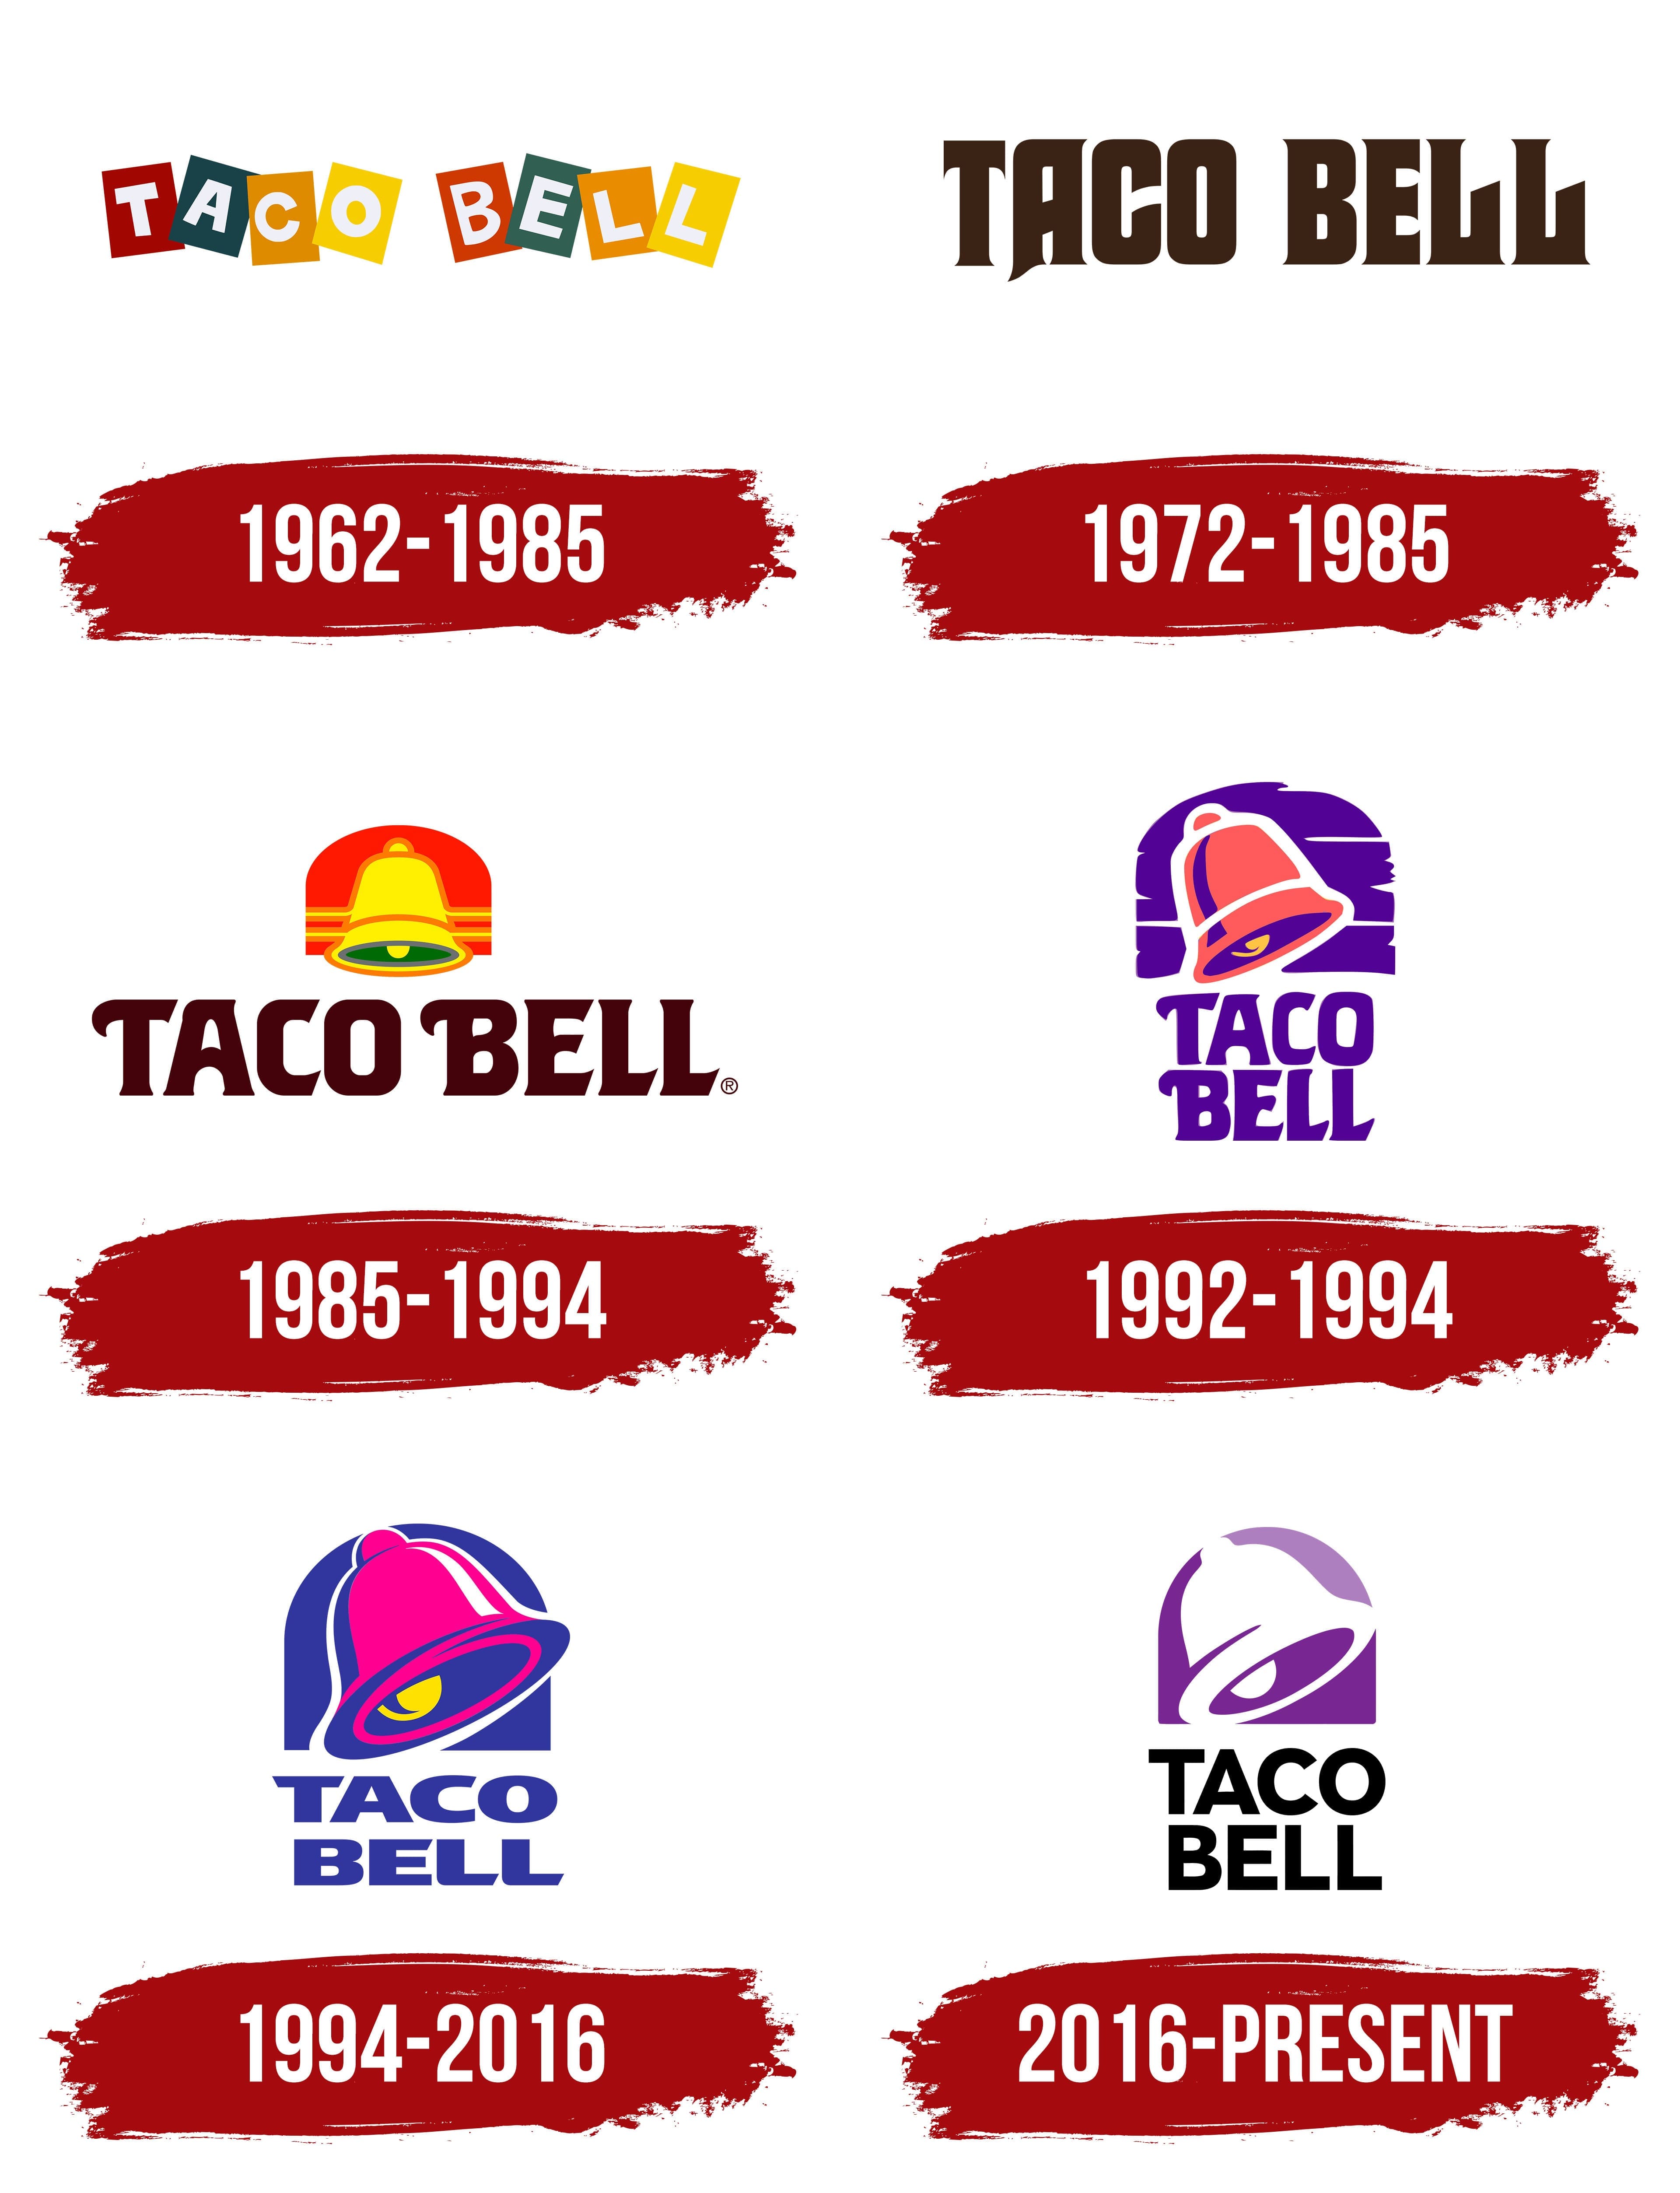 The Complete History Of The Taco Bell Logo - Hatchwise